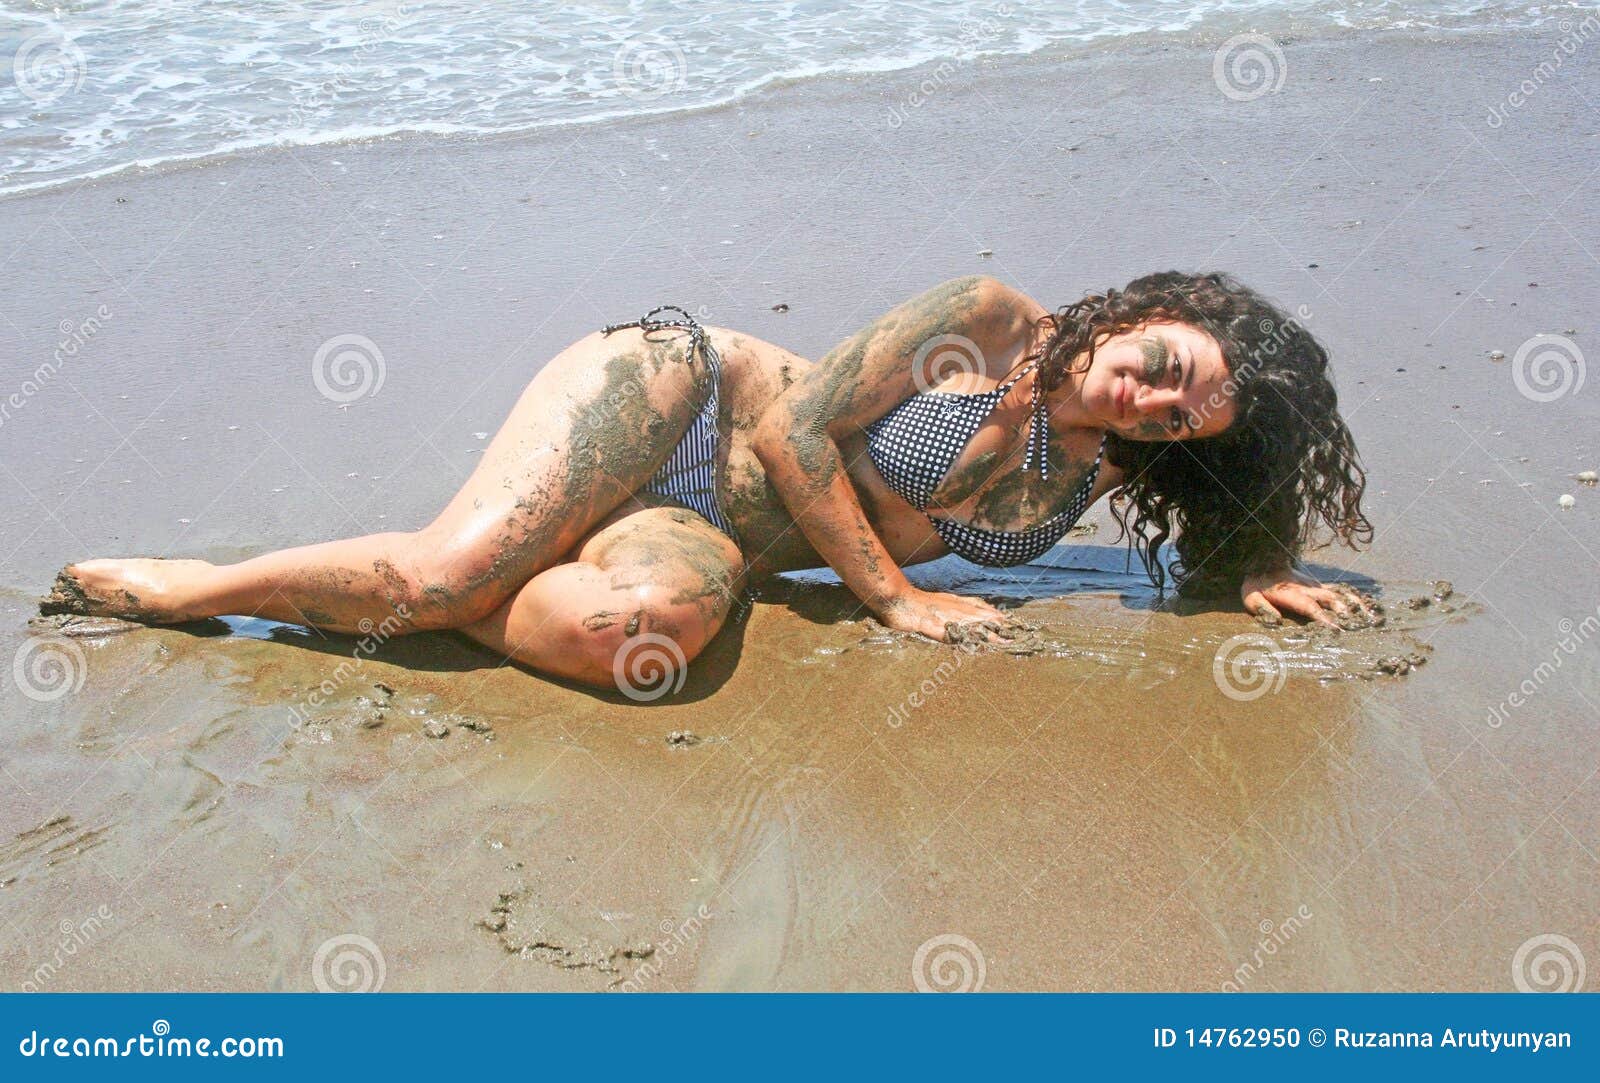 Dirty girl stock photo. Image of person, natural, brunette - 14762950